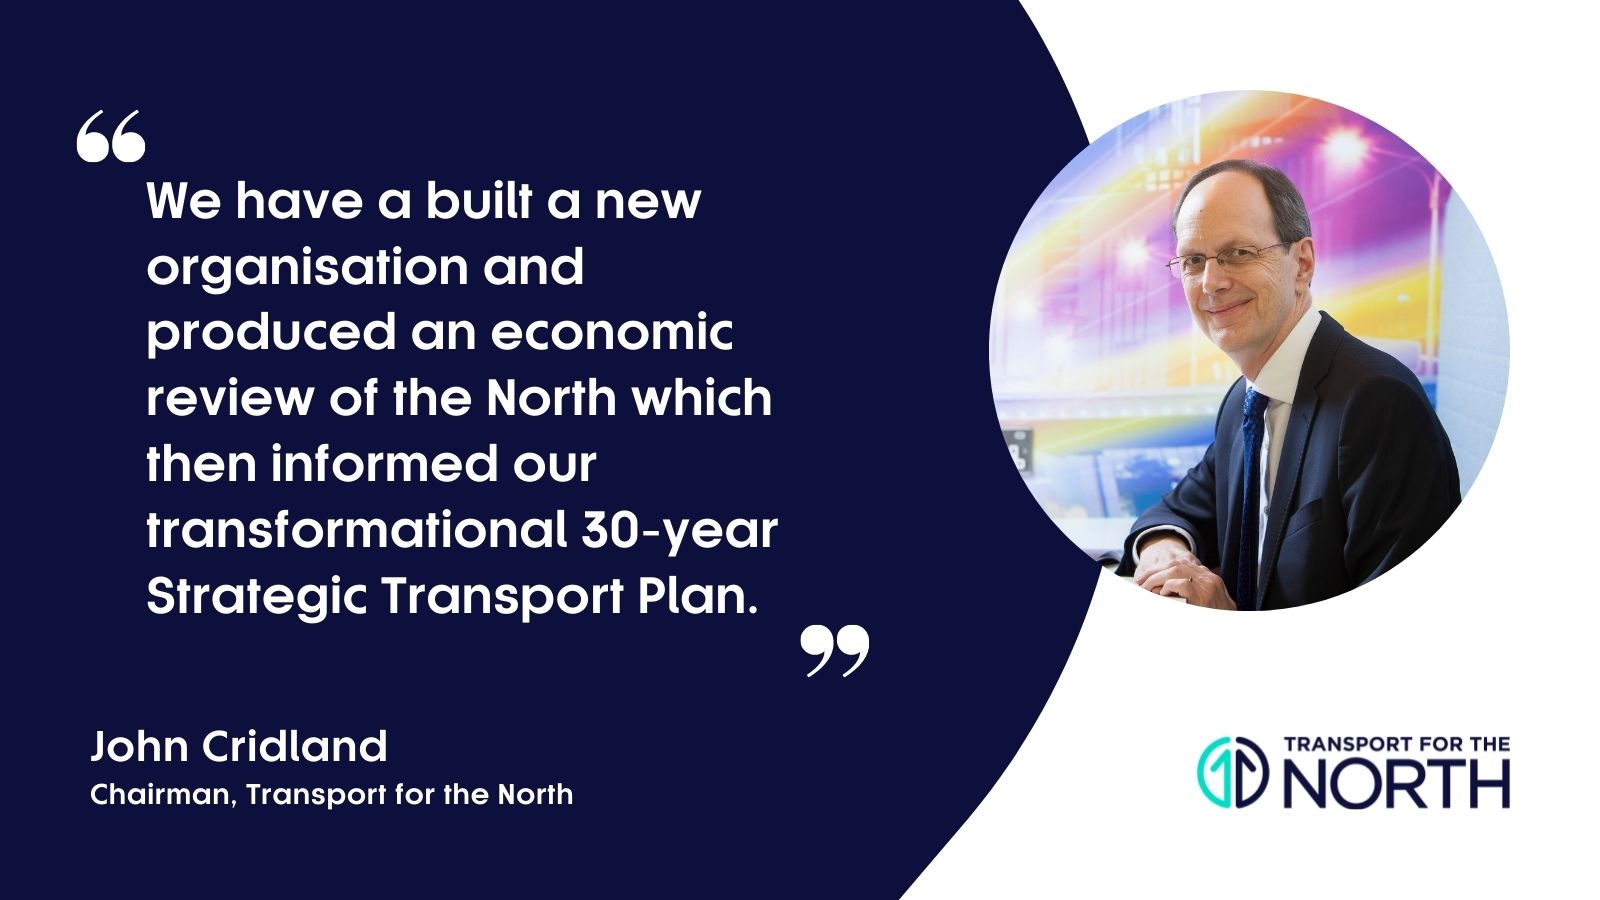 John Cridland on his decision to stand-down as Chairman of Transport for the North